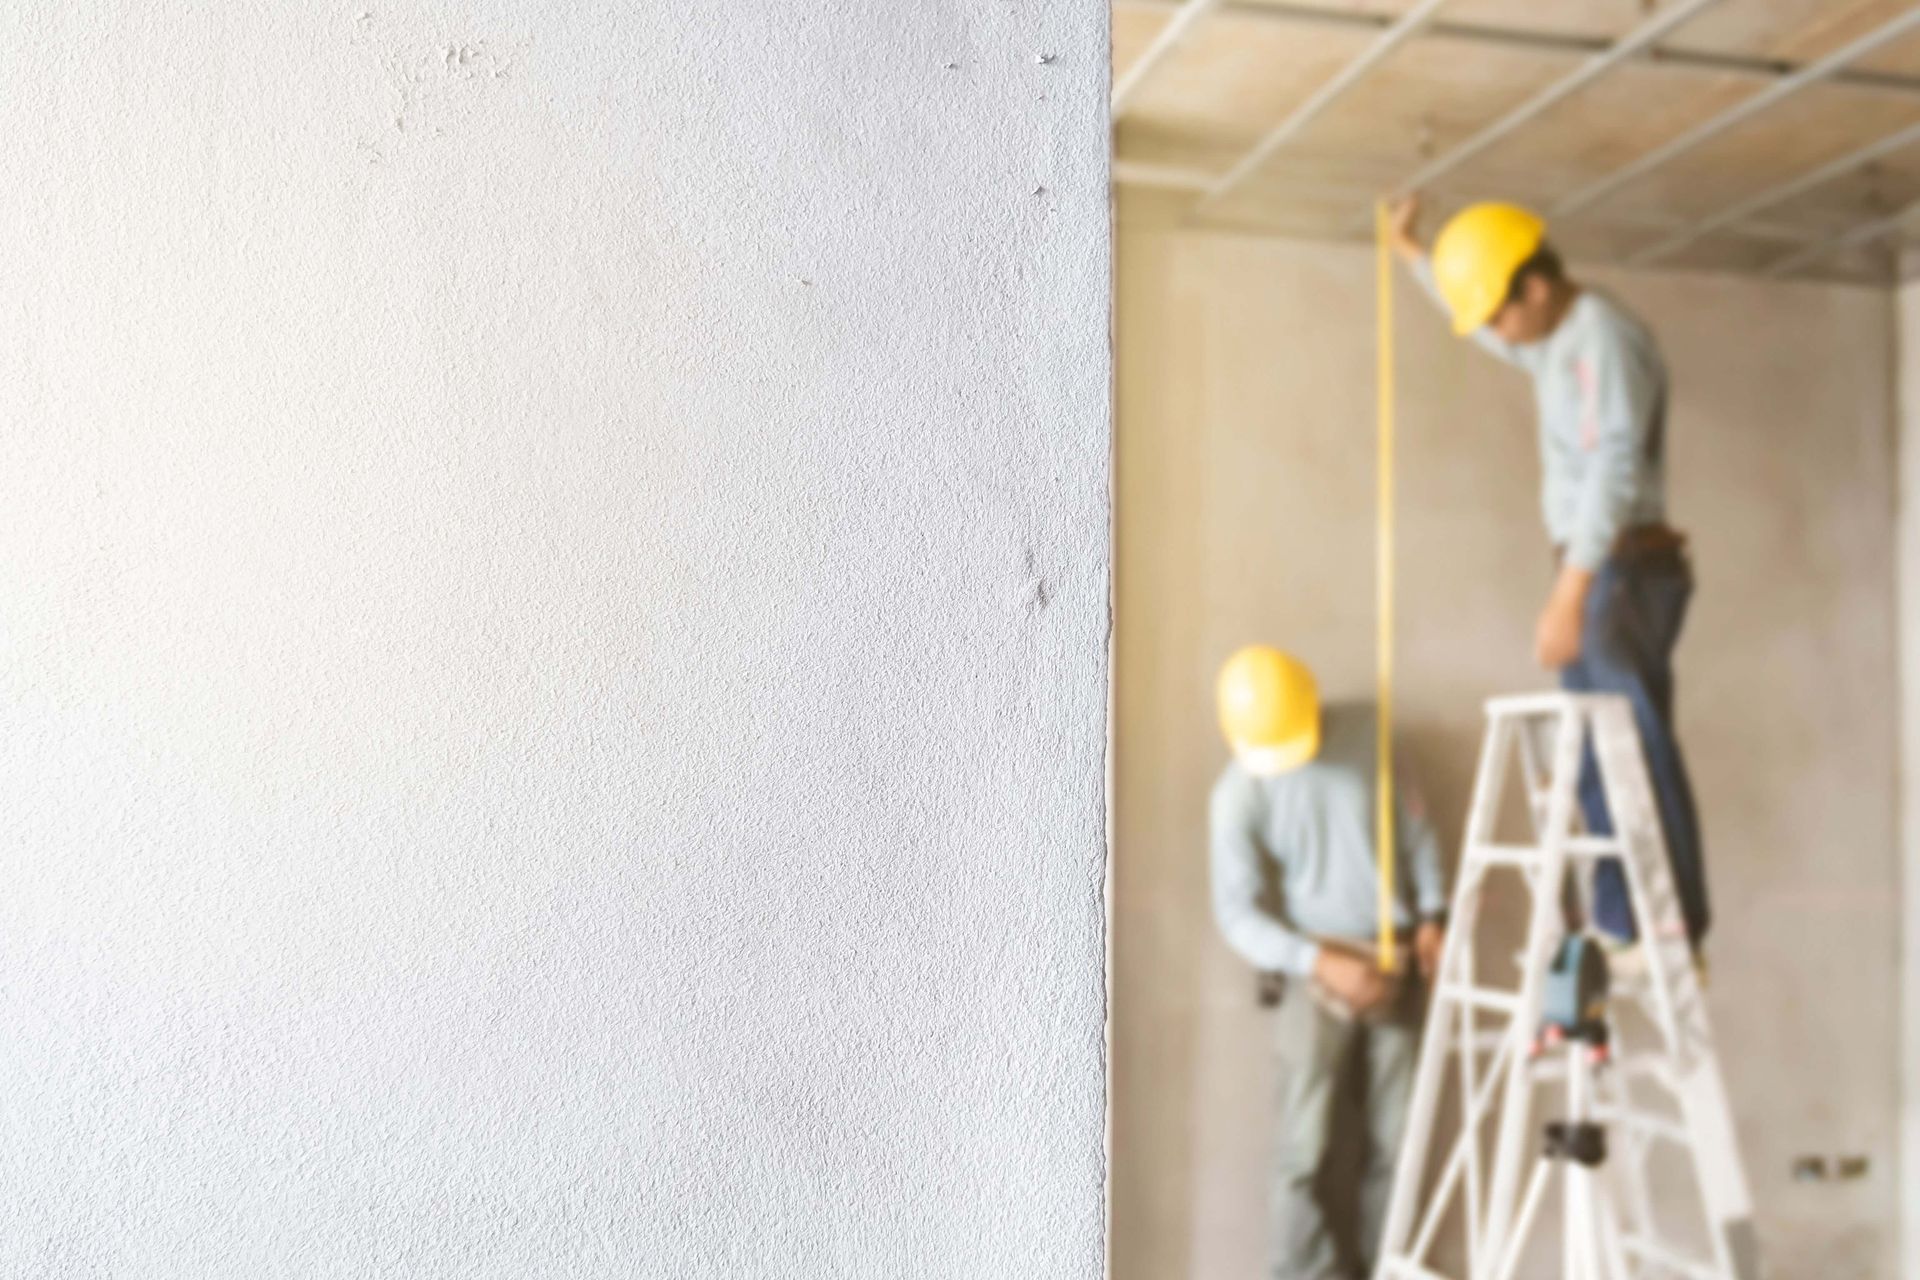 richmond drywall contractors and consulting